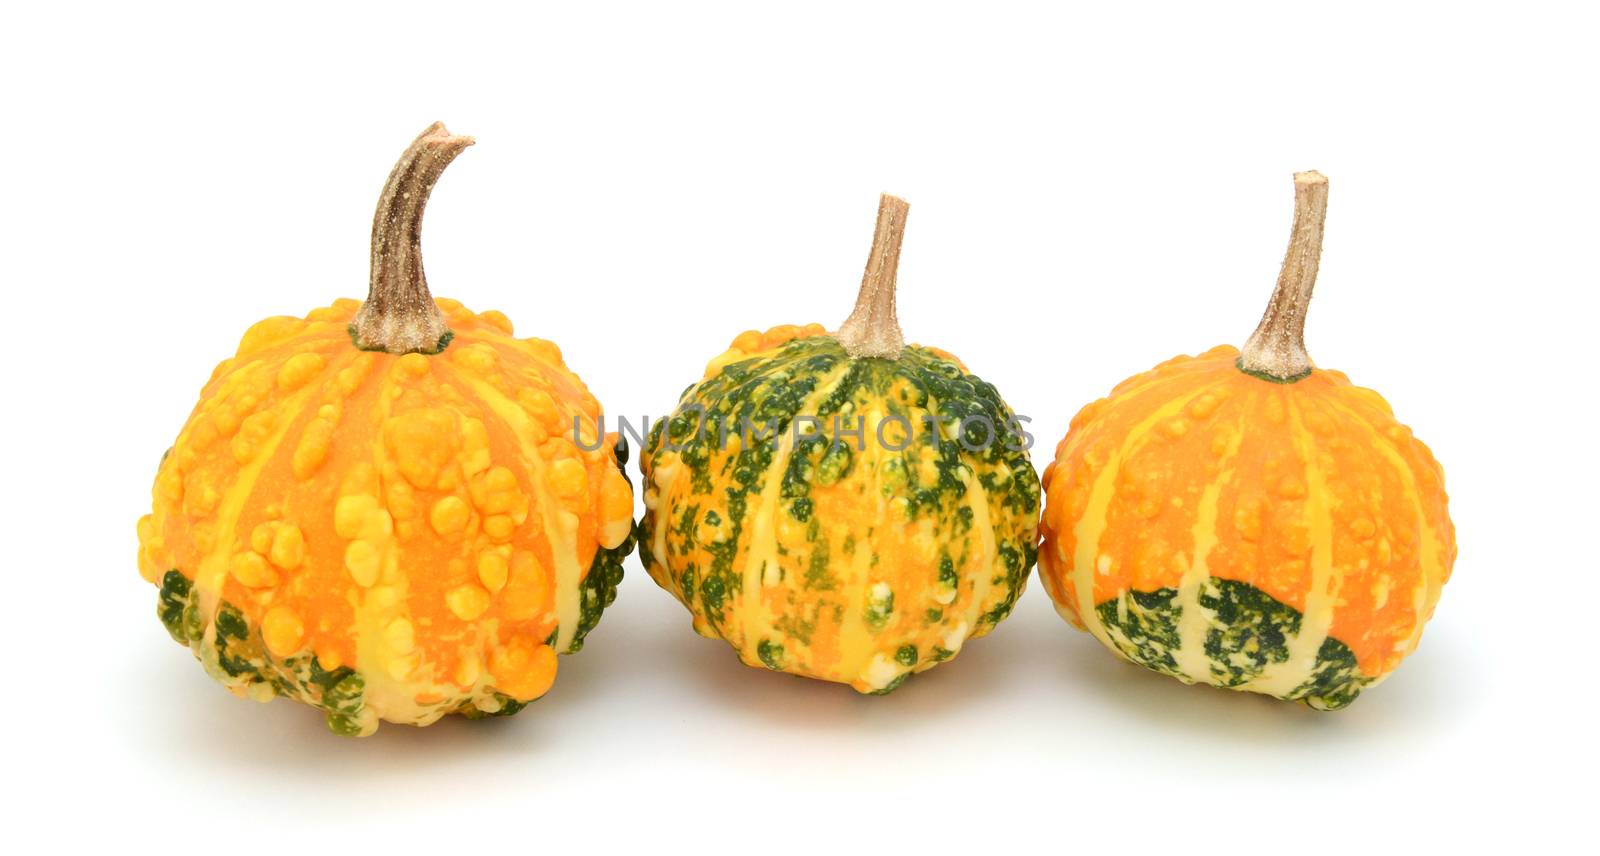 Small warted gourds with lumpy skins and green and yellow markings, on a white background